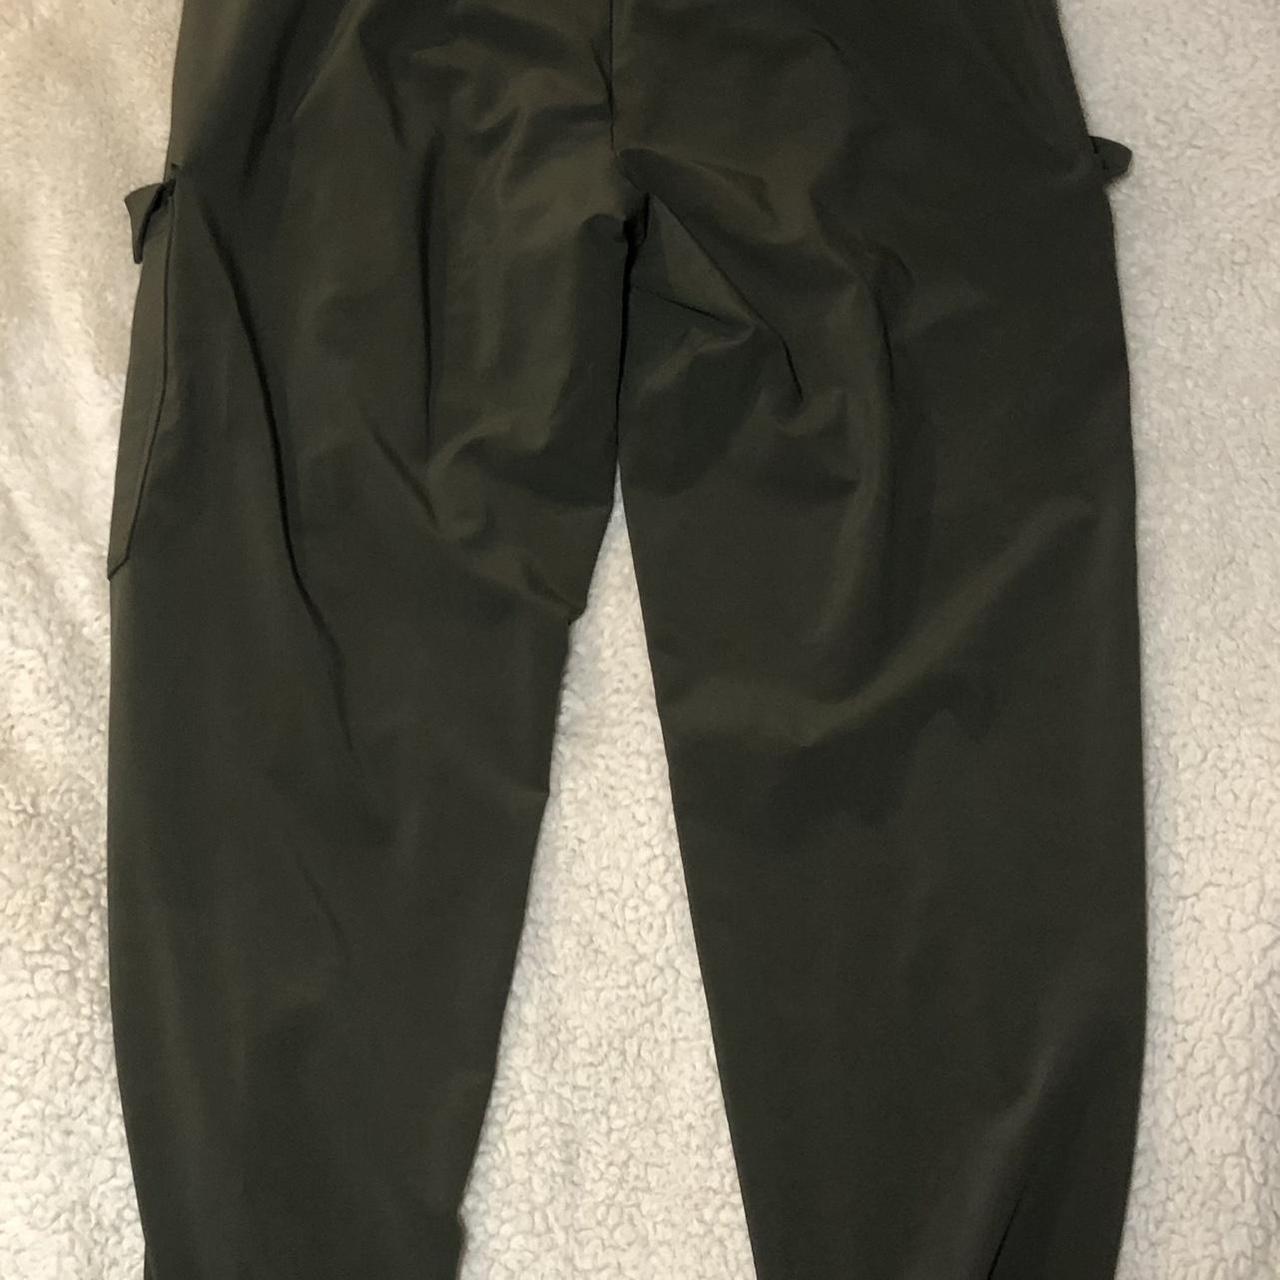 Target “all in motion” stretch joggers—cargo look - Depop